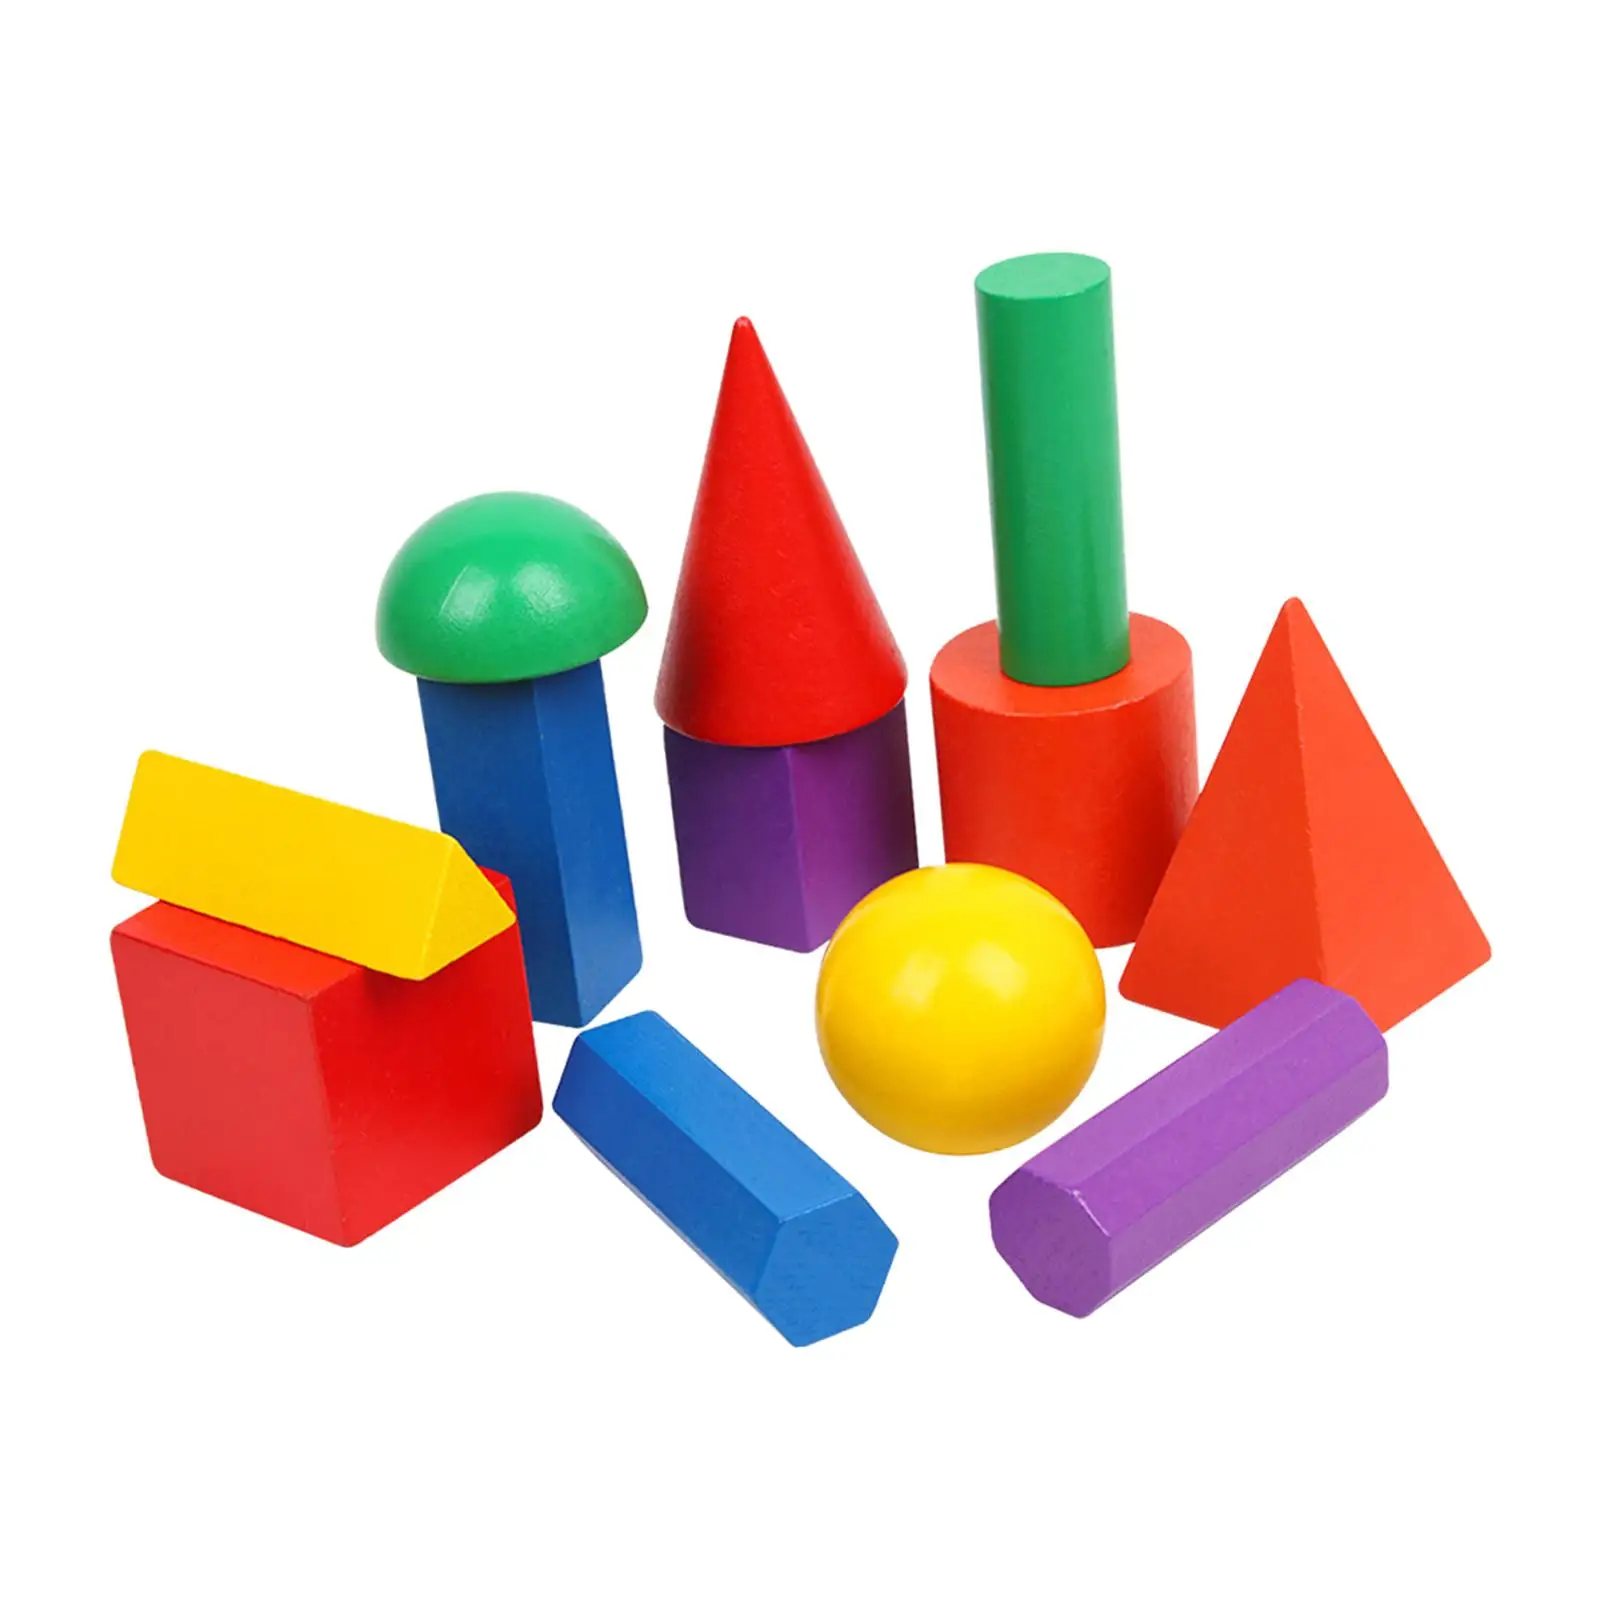 12 Pieces Wood 3D Shapes Geometric Solids Sorting Stacking Toys Geometric Shapes